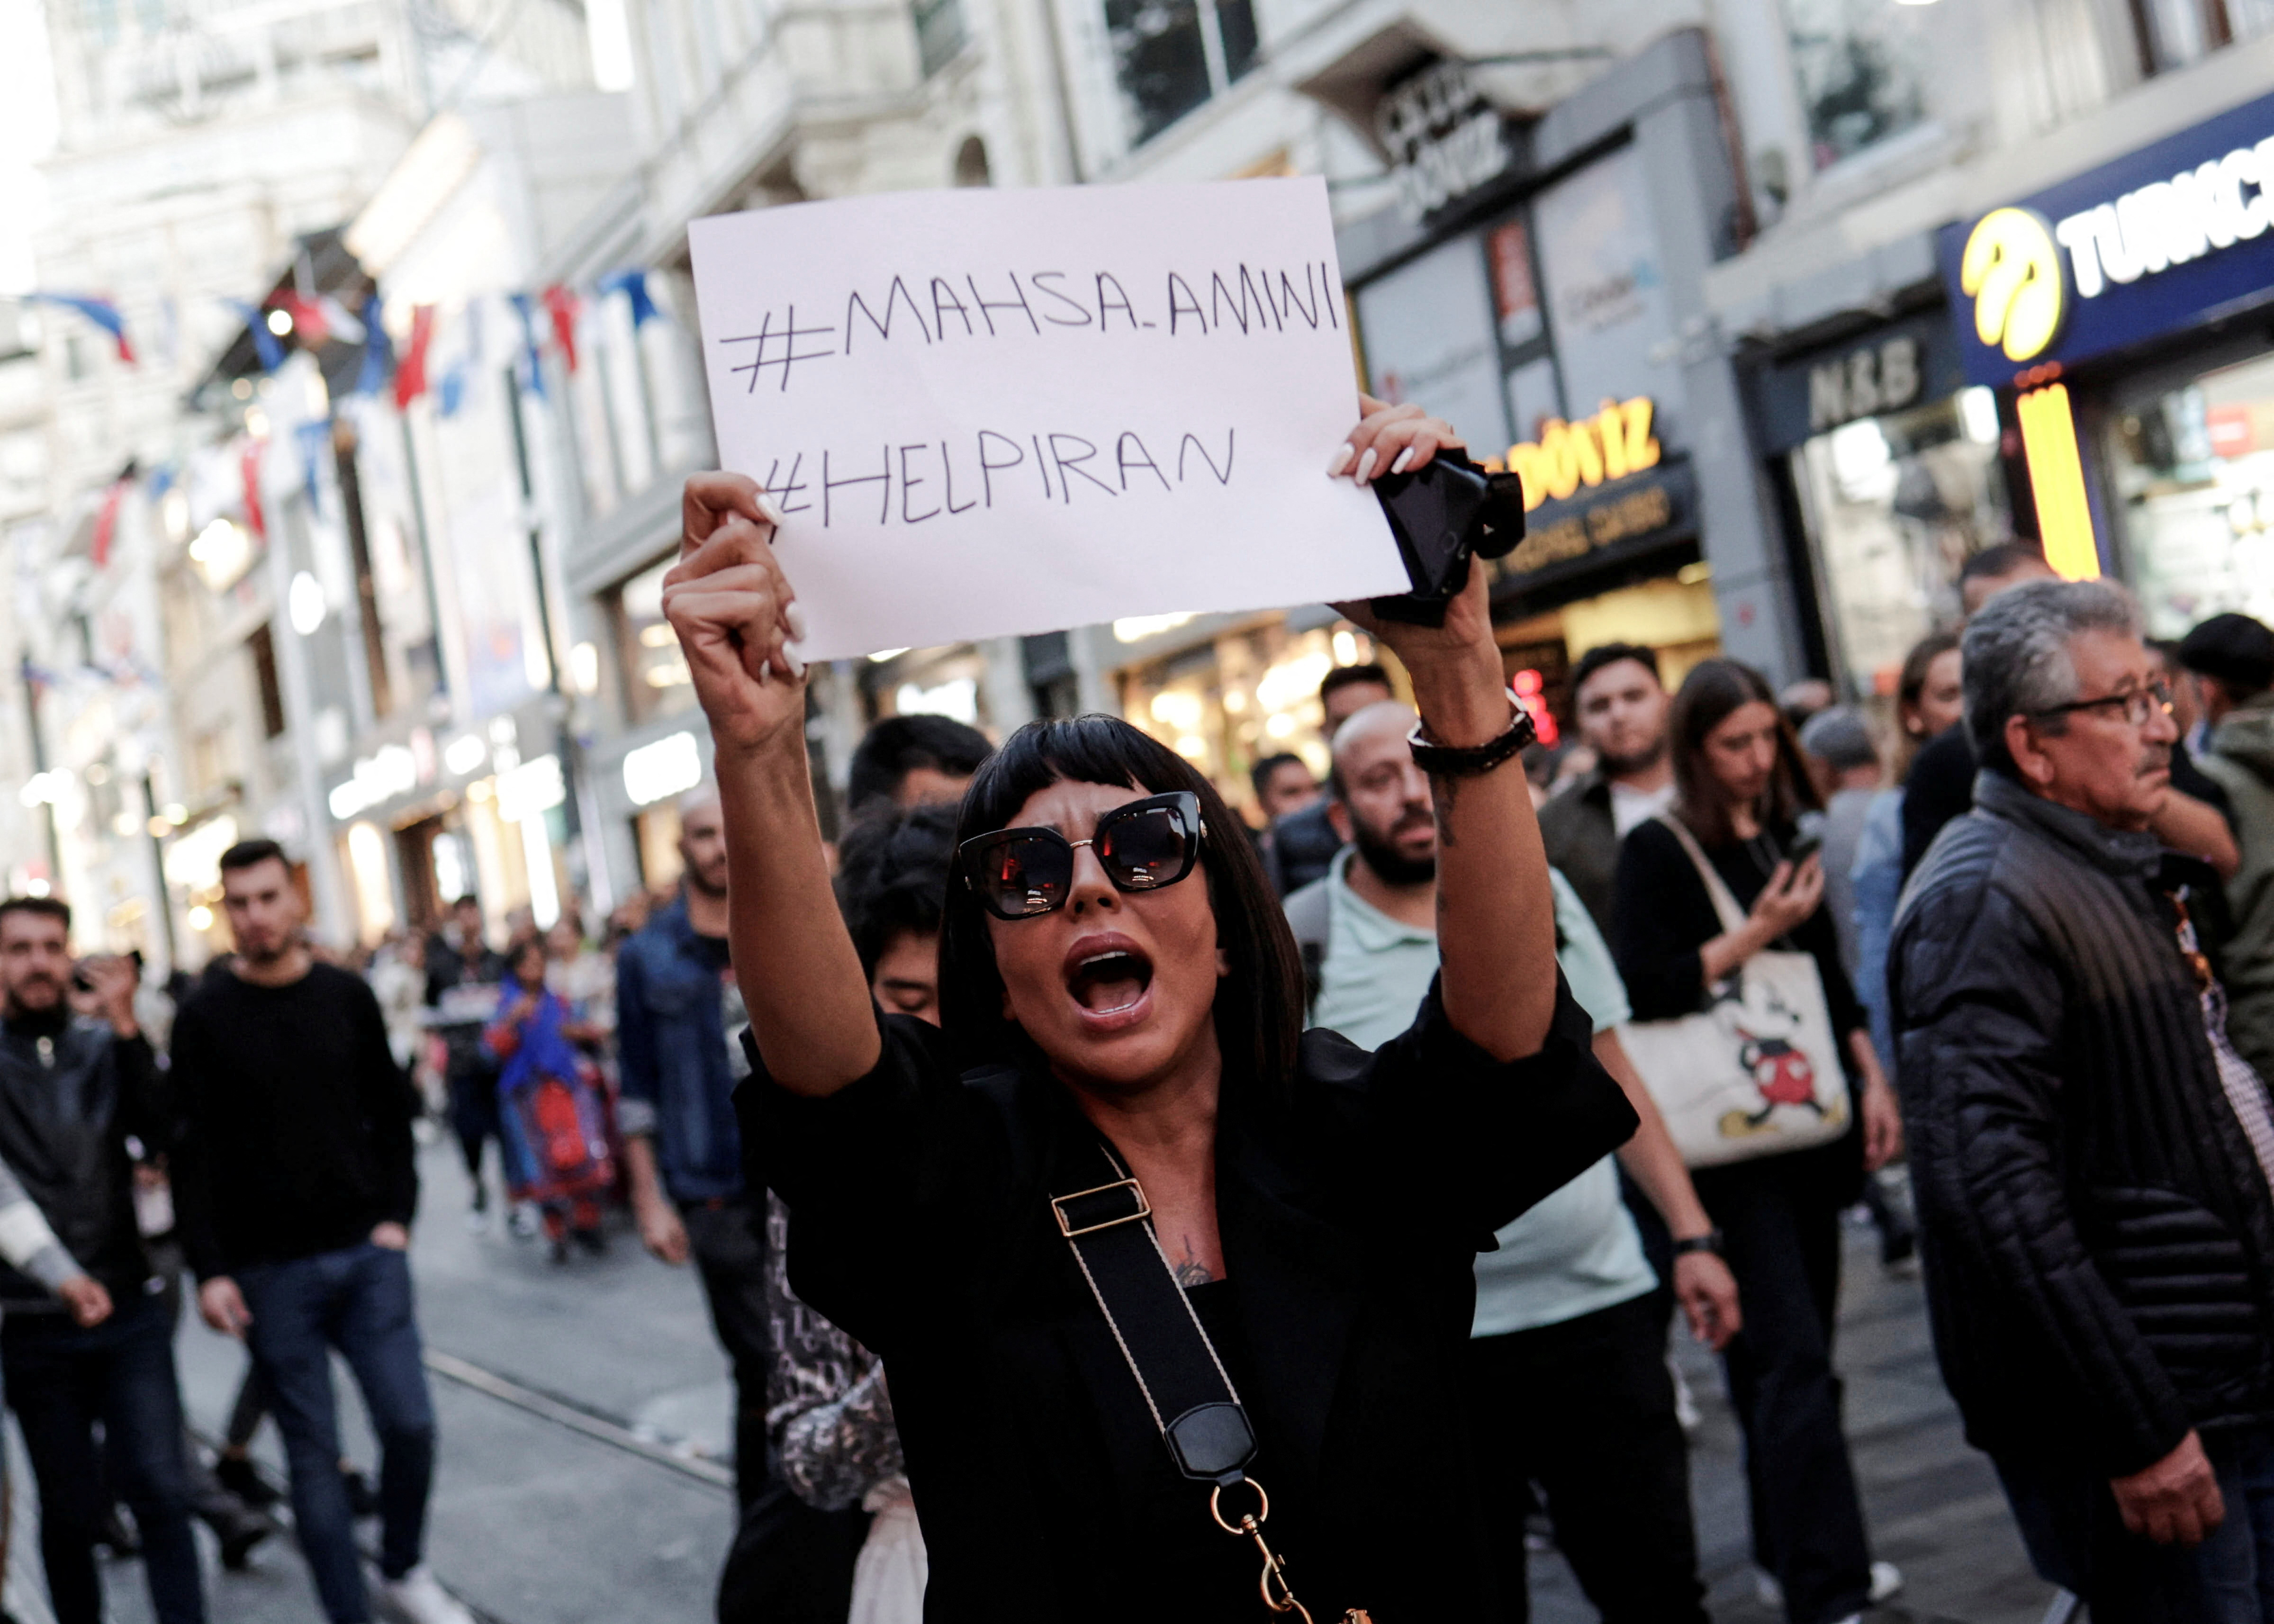 People march in solidarity with women in Iran following the death of Mahsa Amini, in Istanbul